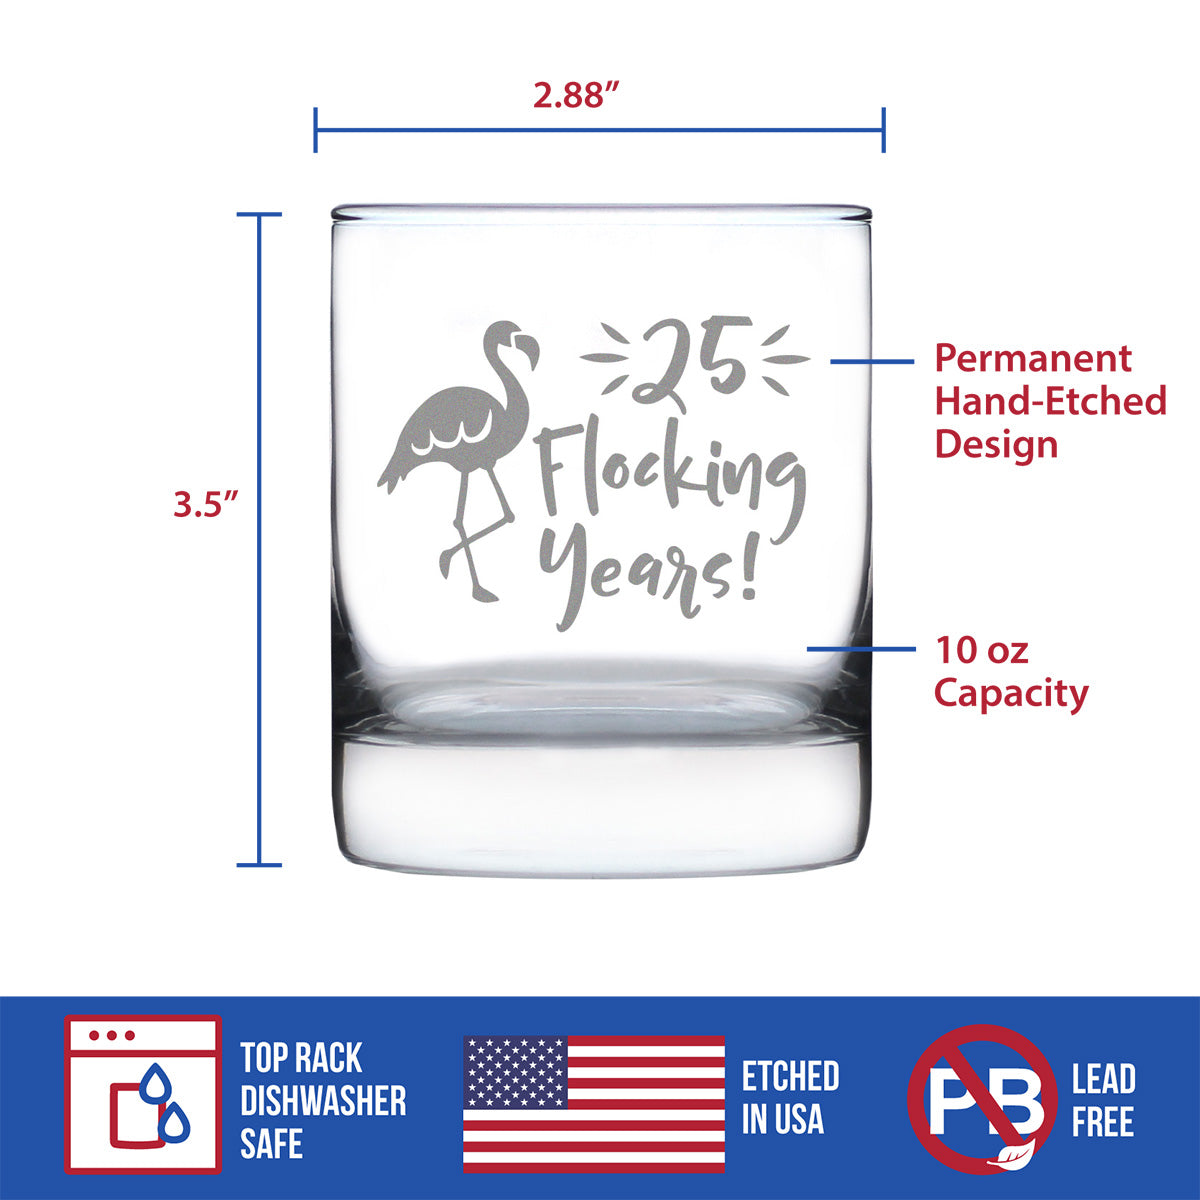 25 Flocking Years 10 oz Rocks Glass or Old Fashioned Glass, Etched Sayings - Cute 25th Anniversary or Birthday Gift for Flamingo Lovers